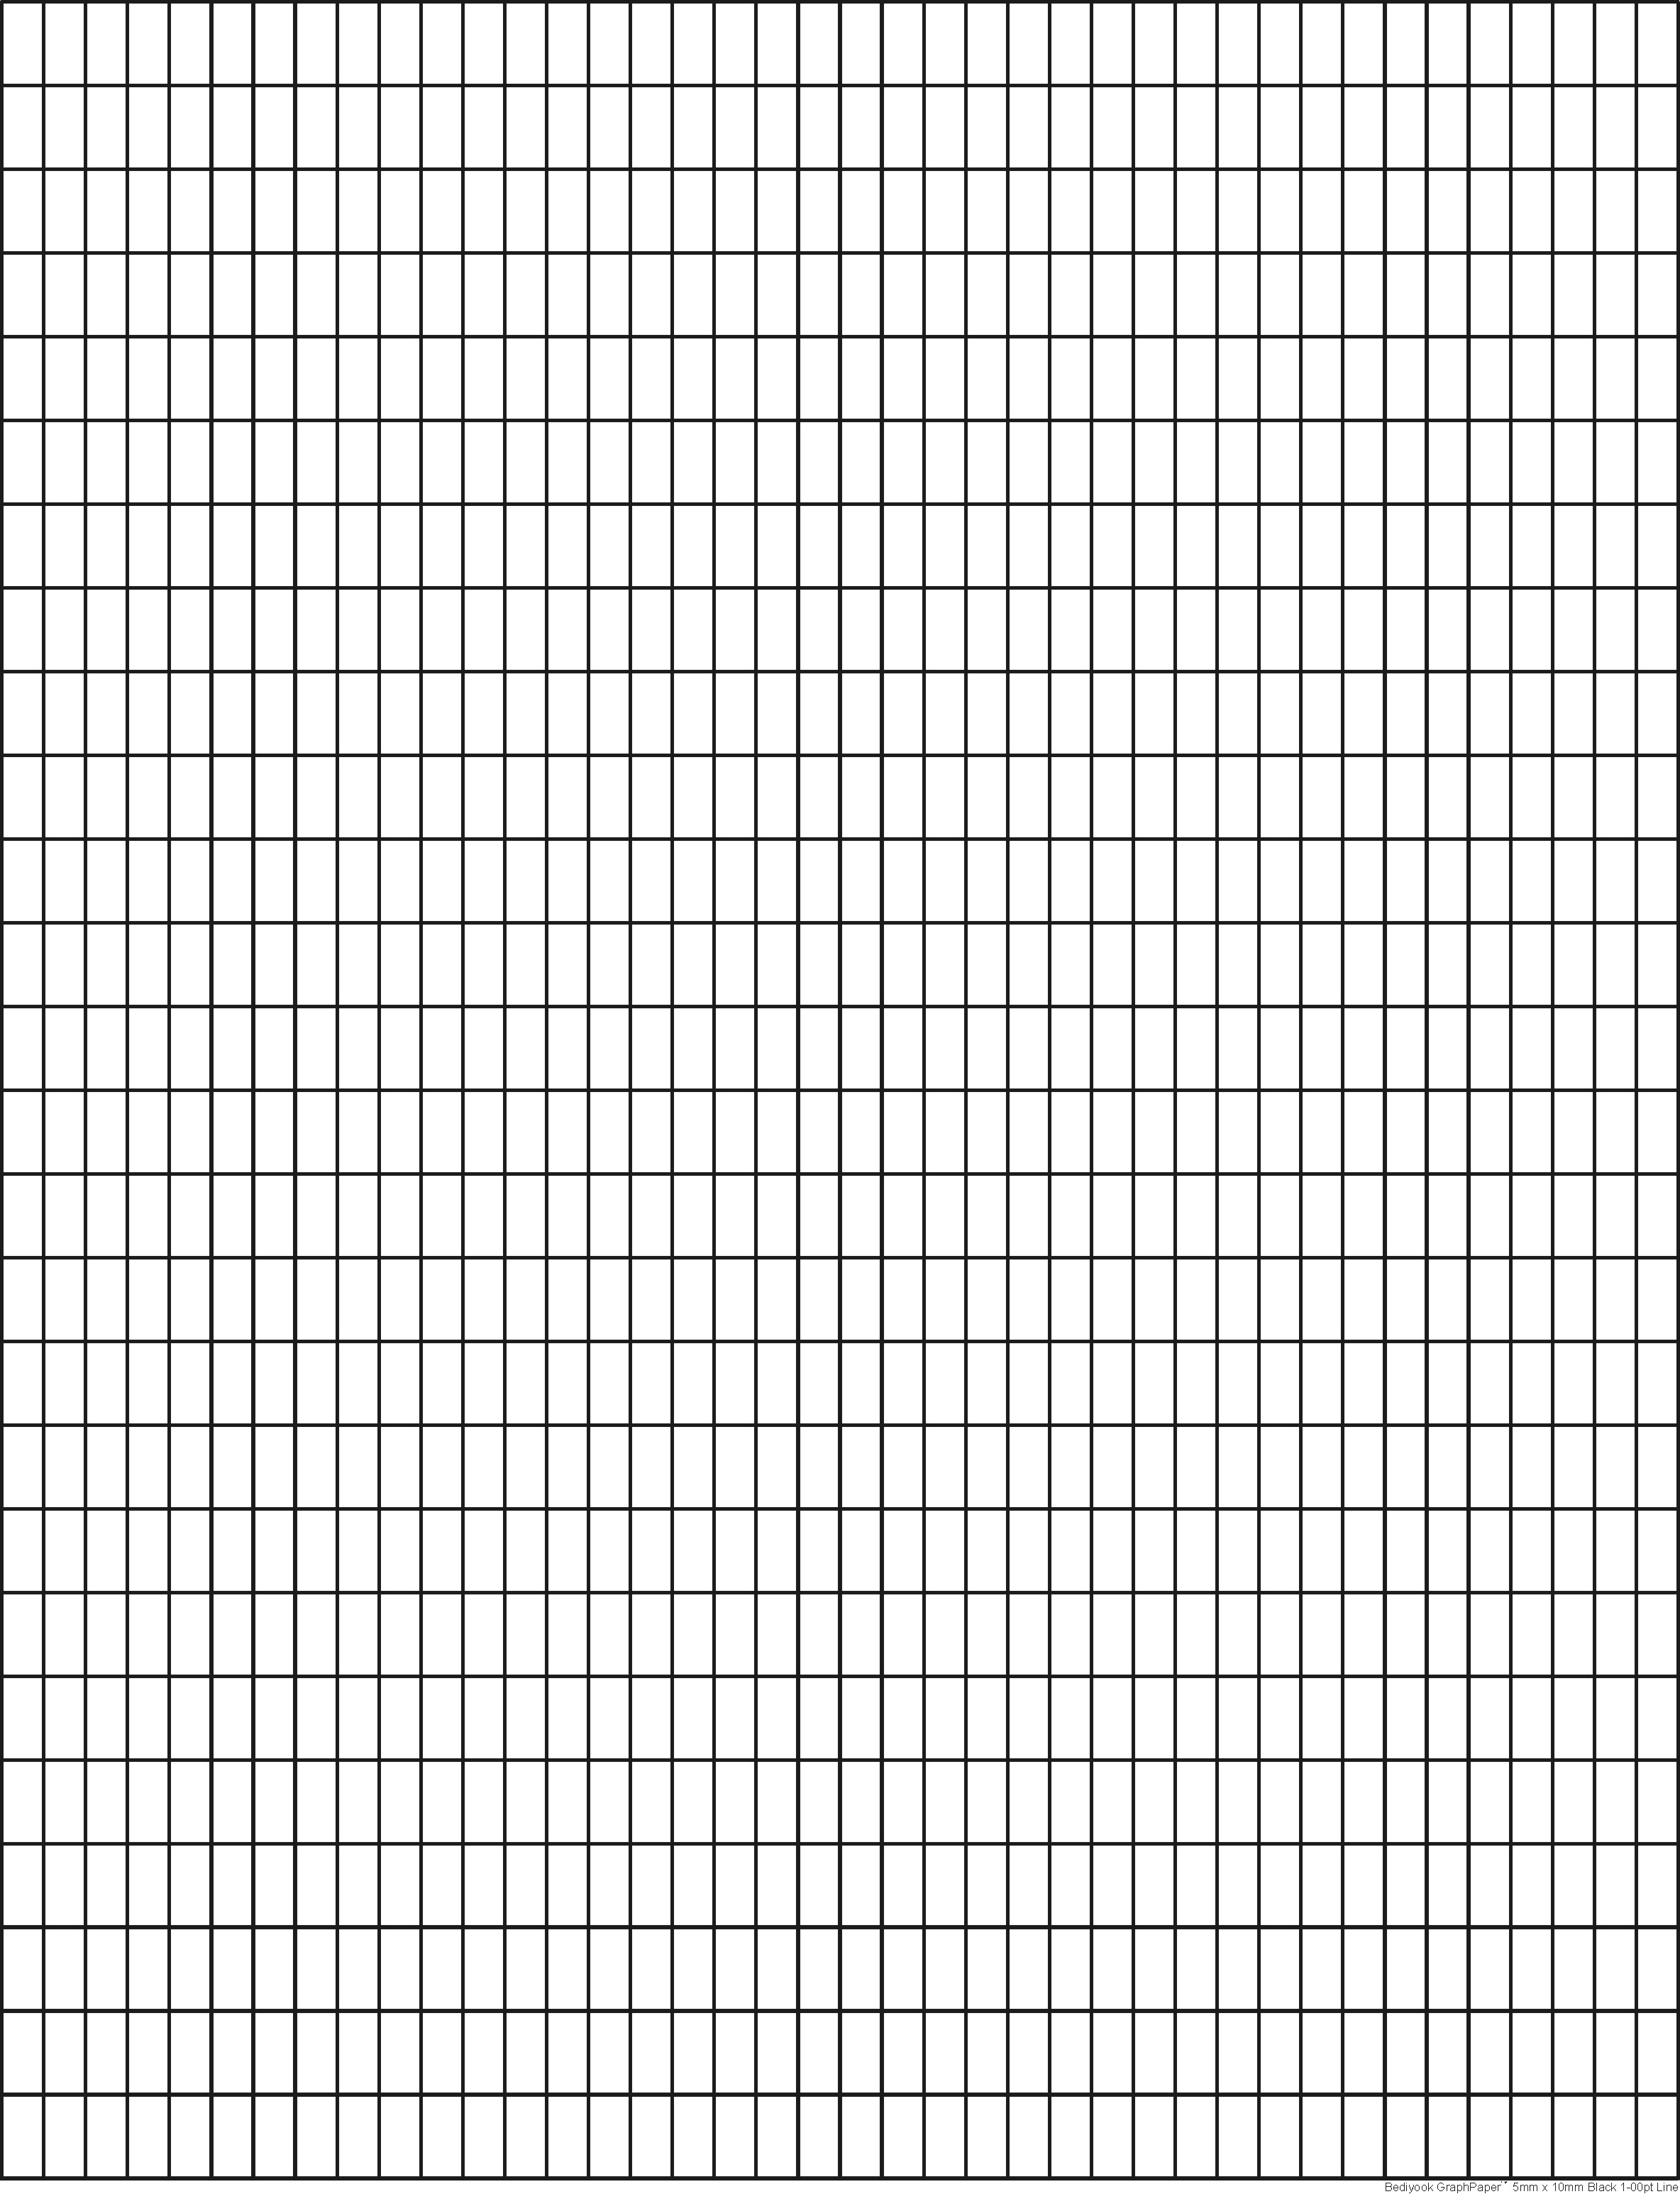 Math : Print Graph Paper Word 1 2 Inch Tips For Teachers Printable - Free Printable Graph Paper 1 4 Inch